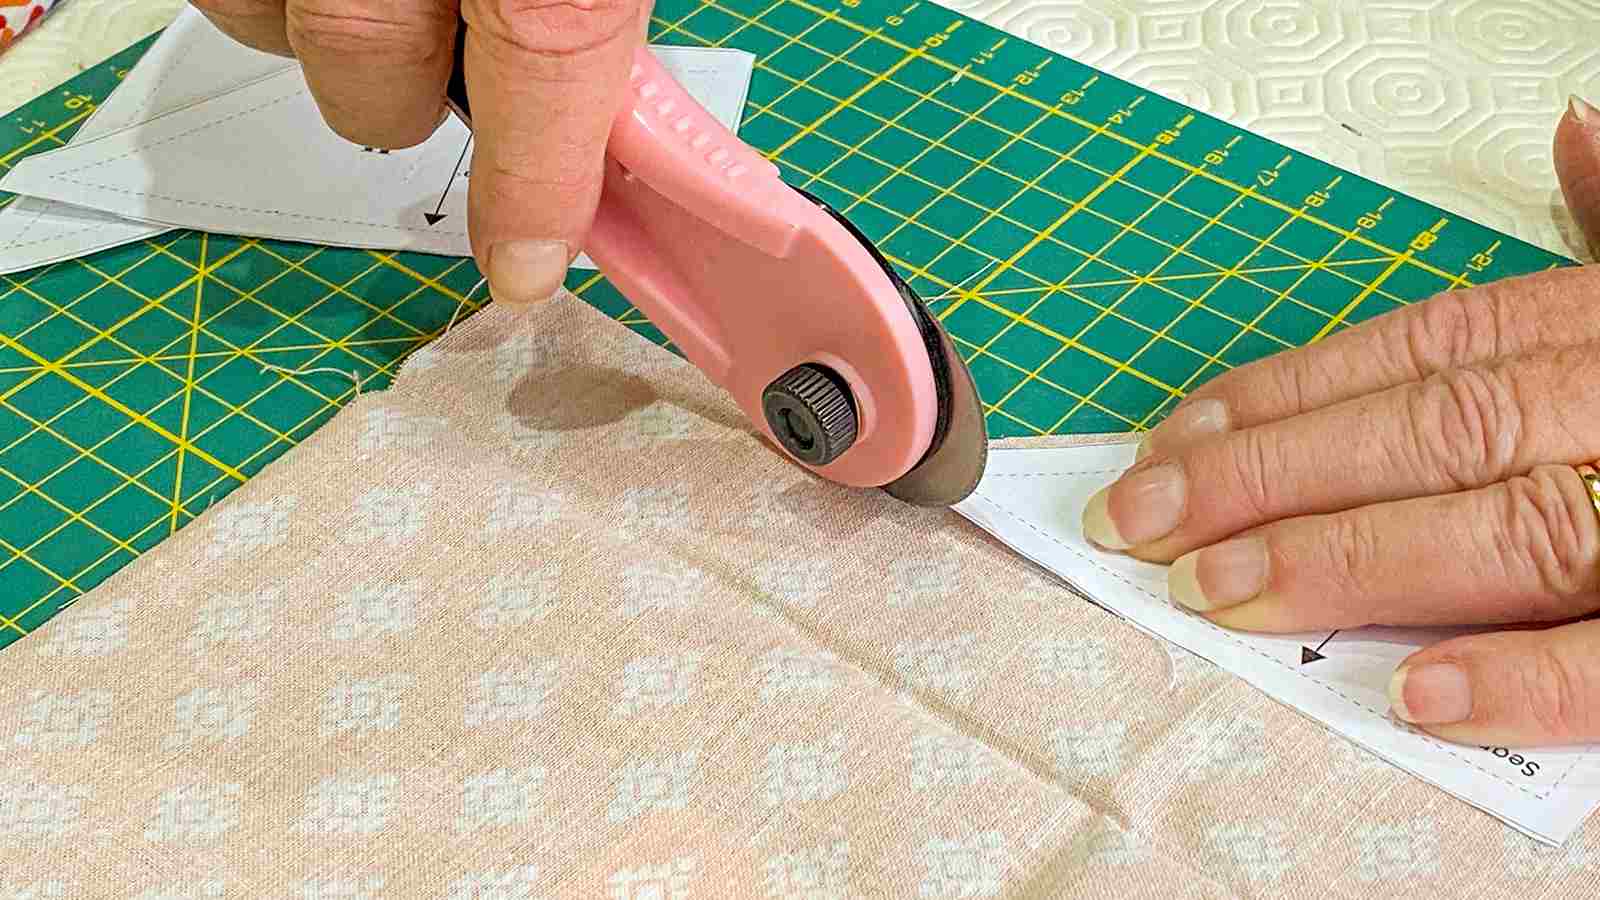 A person cutting a piece of fabric with scissors.